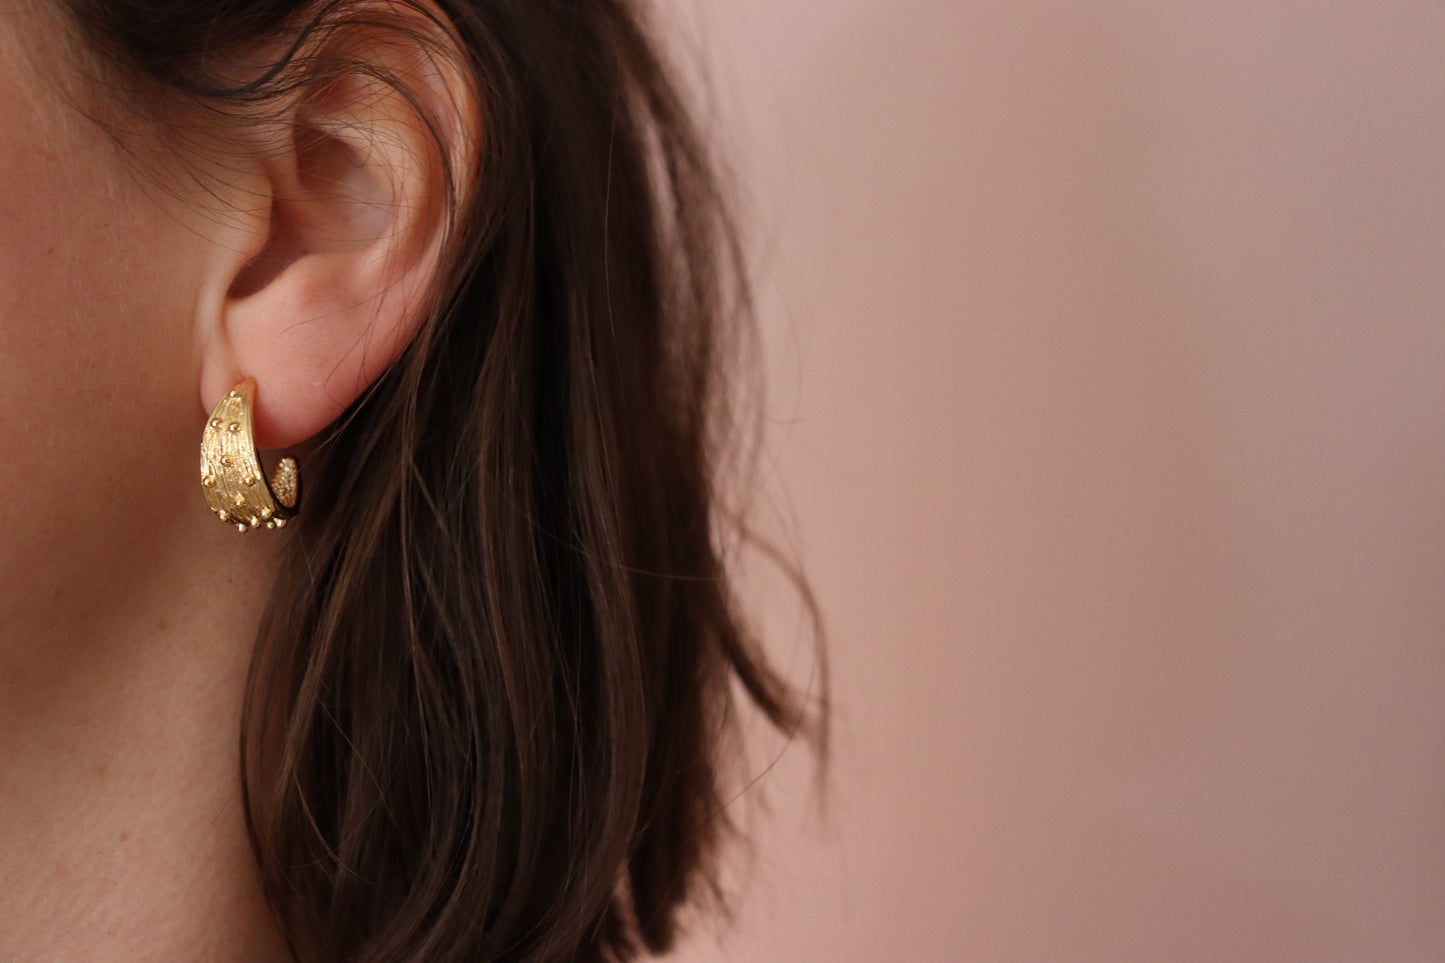 Gold Plated Half Hoop Earring, with little spikes covering its half moon shape. Worn on  a left ear, with brown hair and a pink background. 